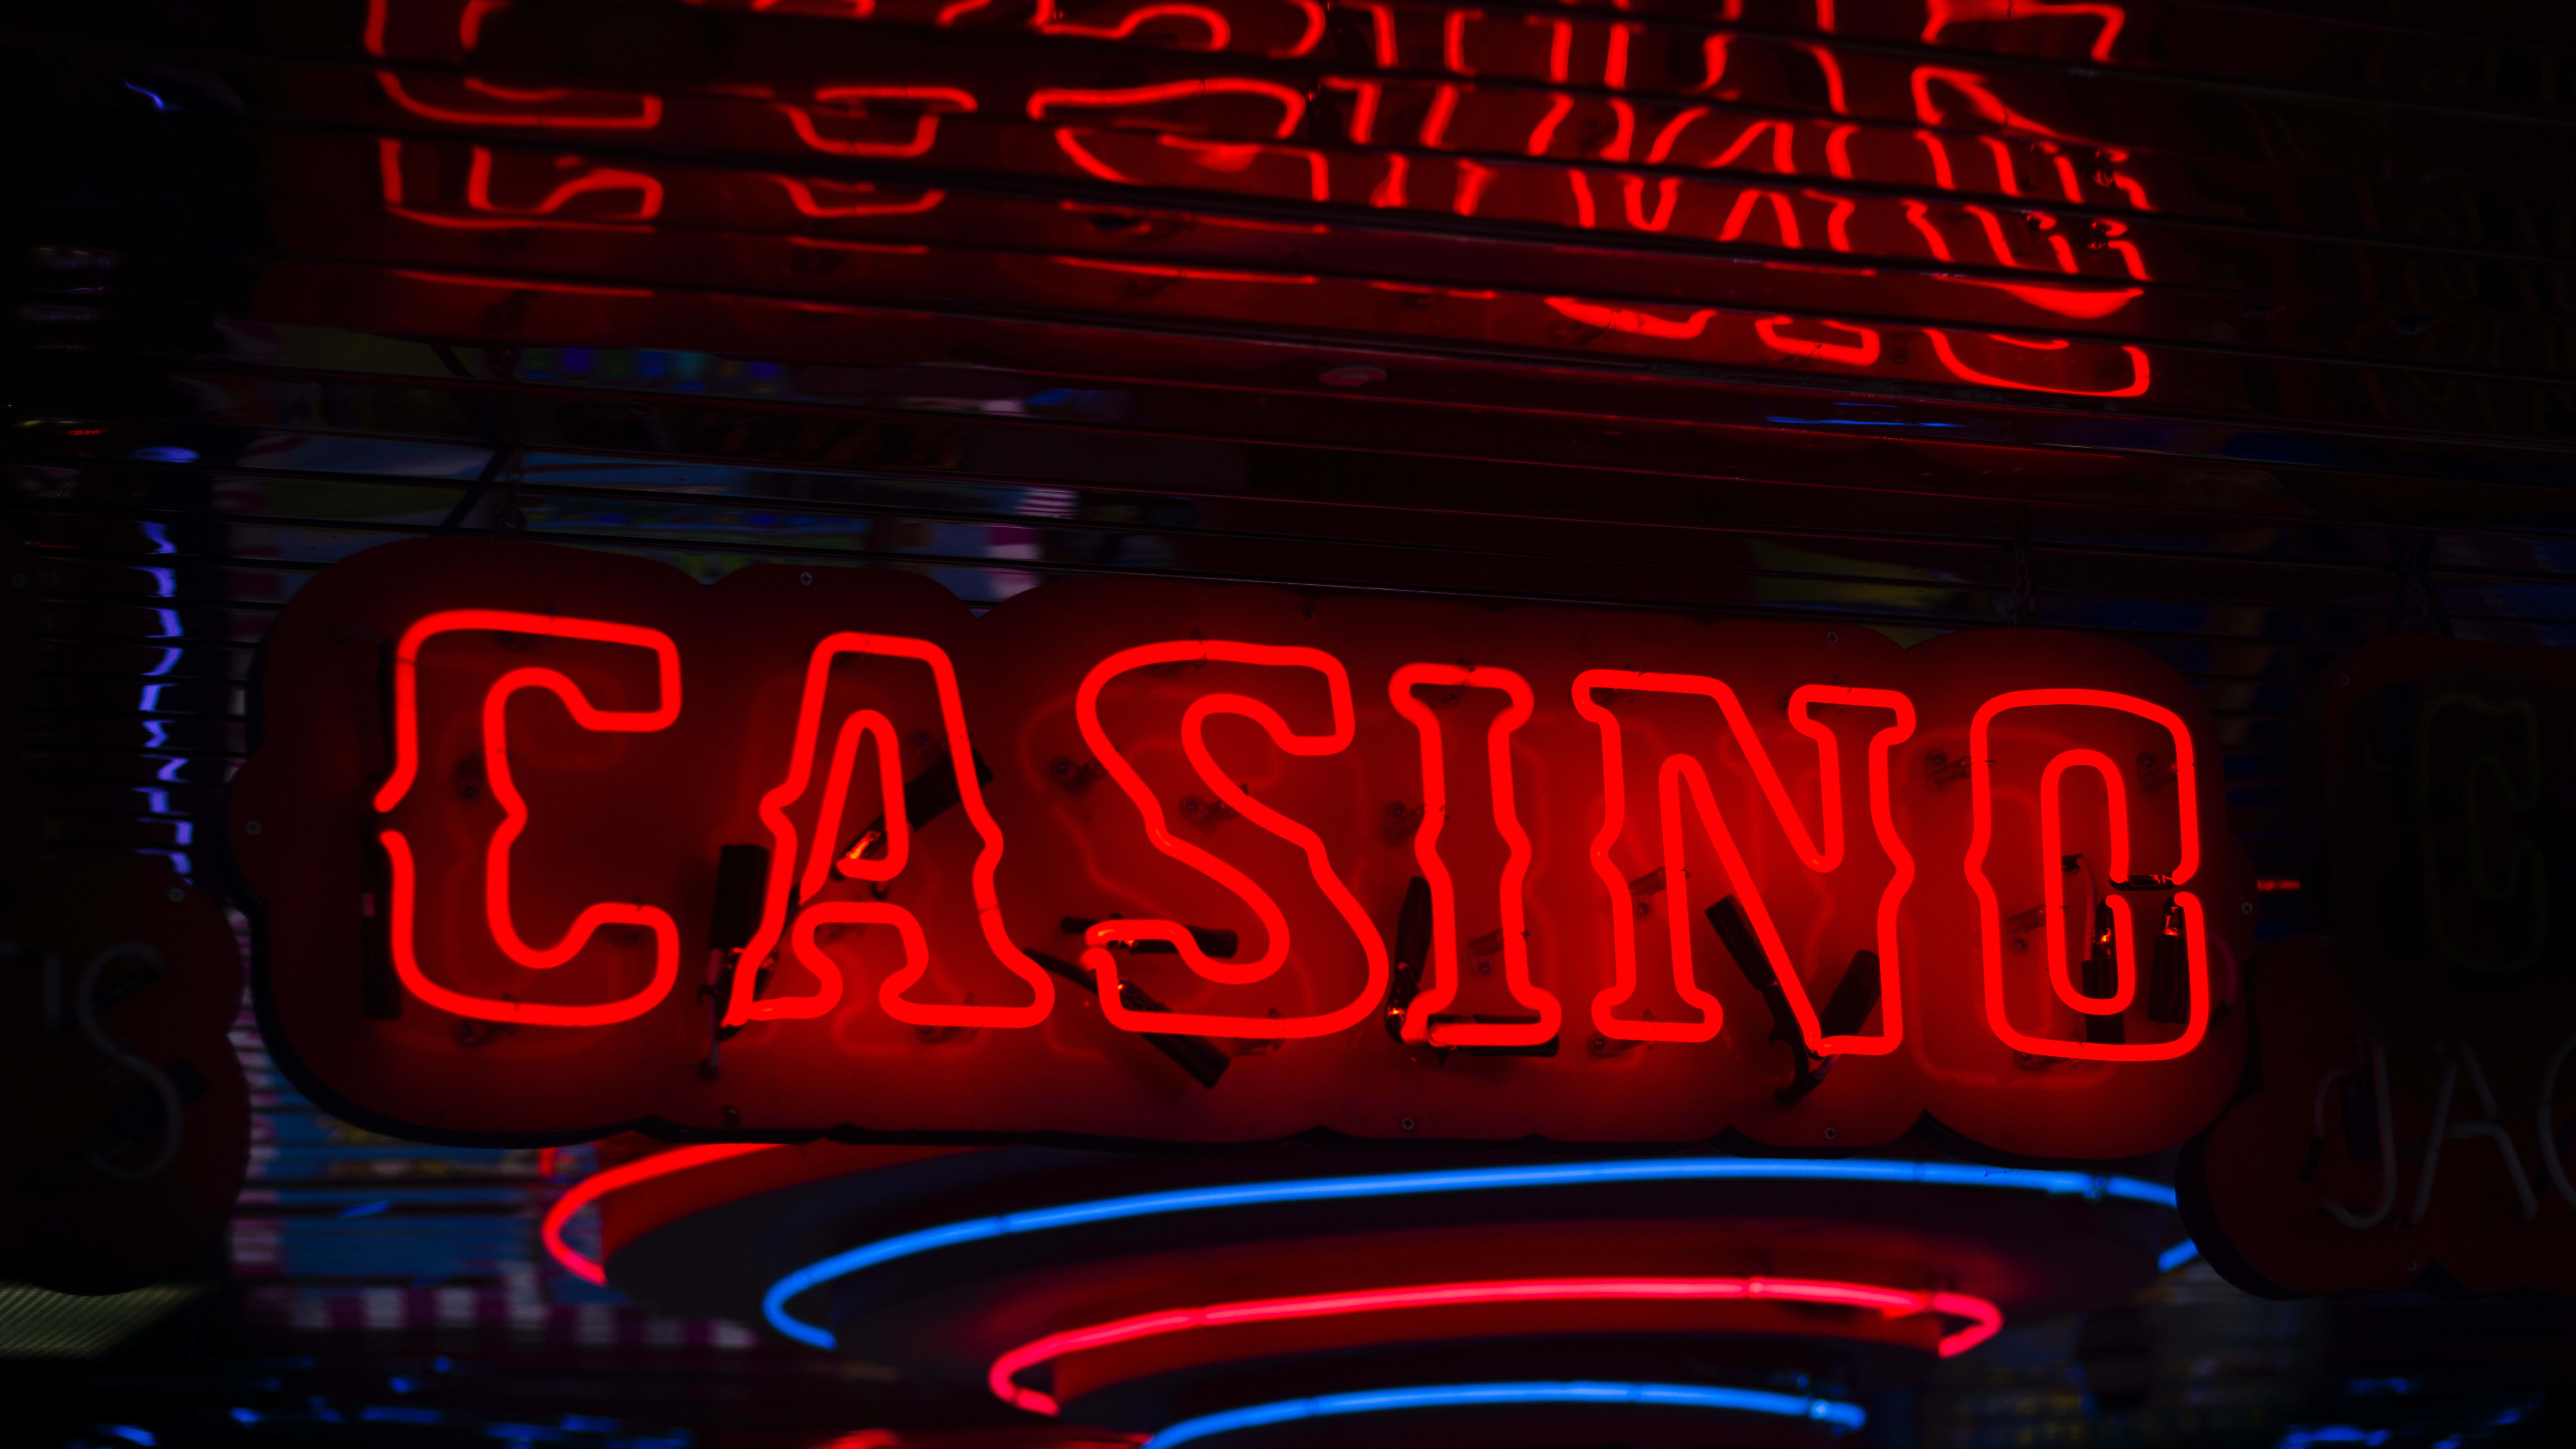 Basic Casino Terminologies Every Player Should Know